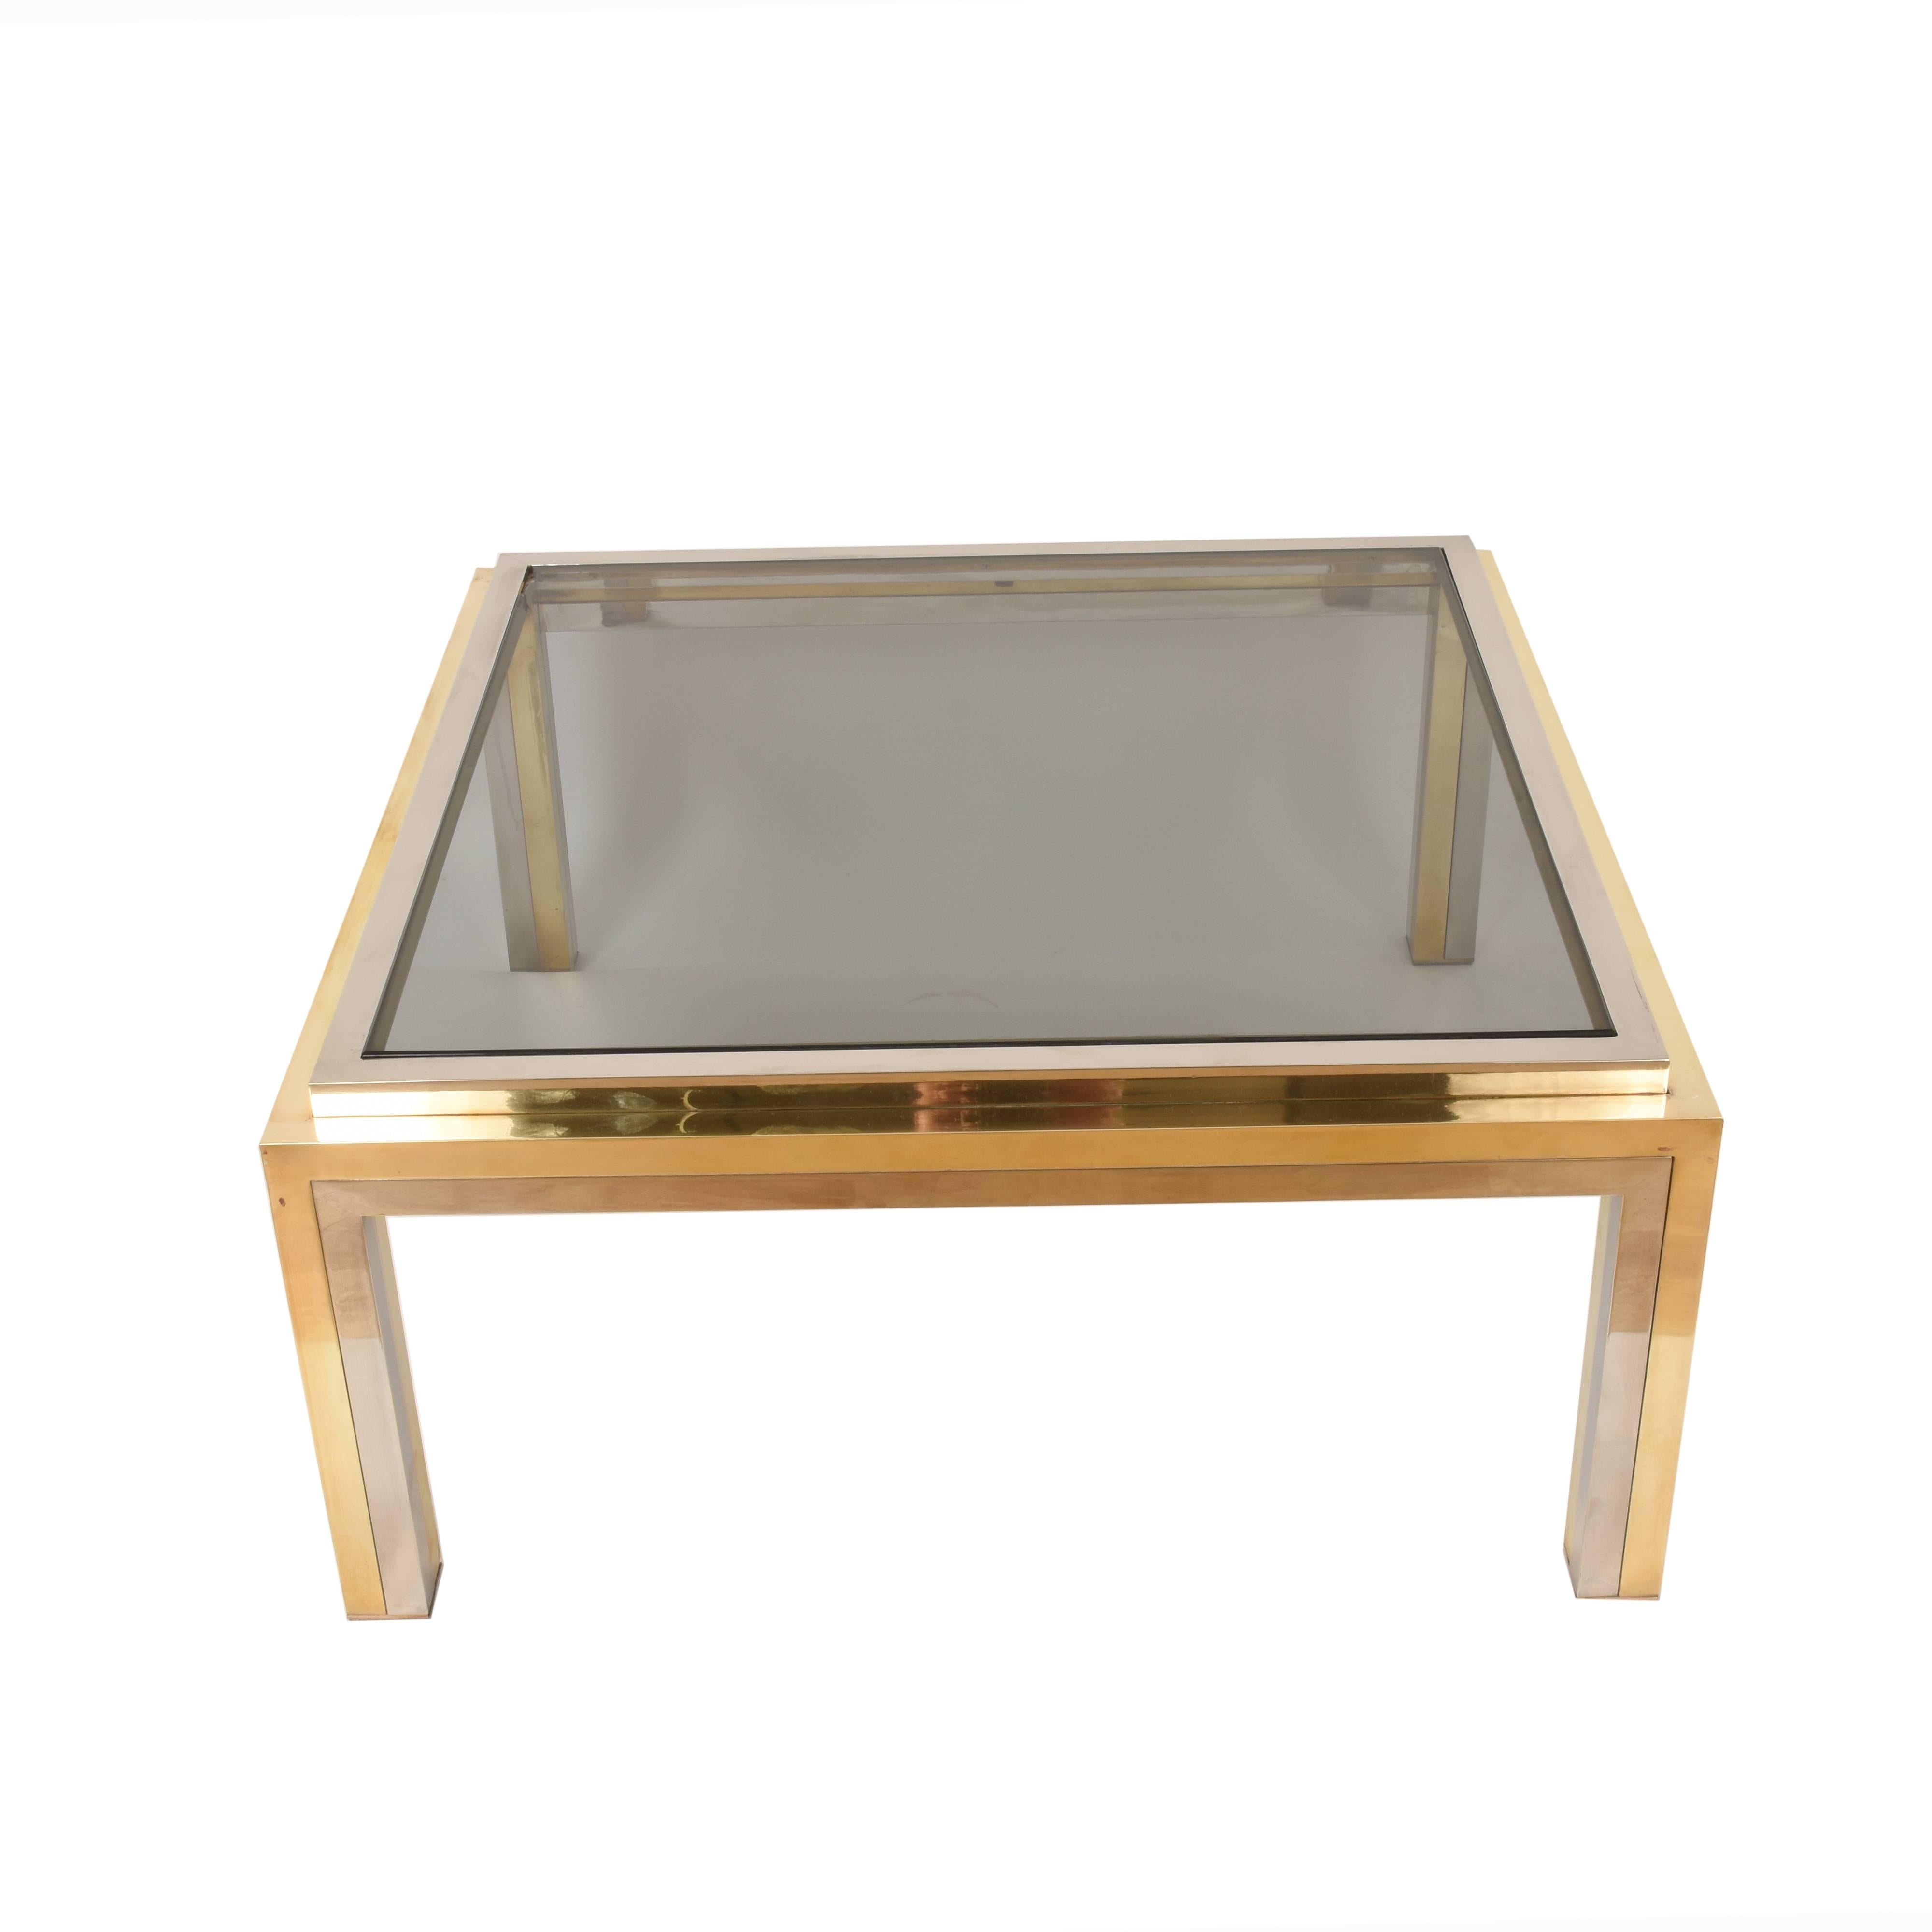 Wonderful and elegant midcentury coffee table in chromed metal and brass, smoked glass. It was produced in Italy during 1970s.

It is attributed to design Master Willy Rizzo, and his hand adds to the seductive elegance of this midcentury